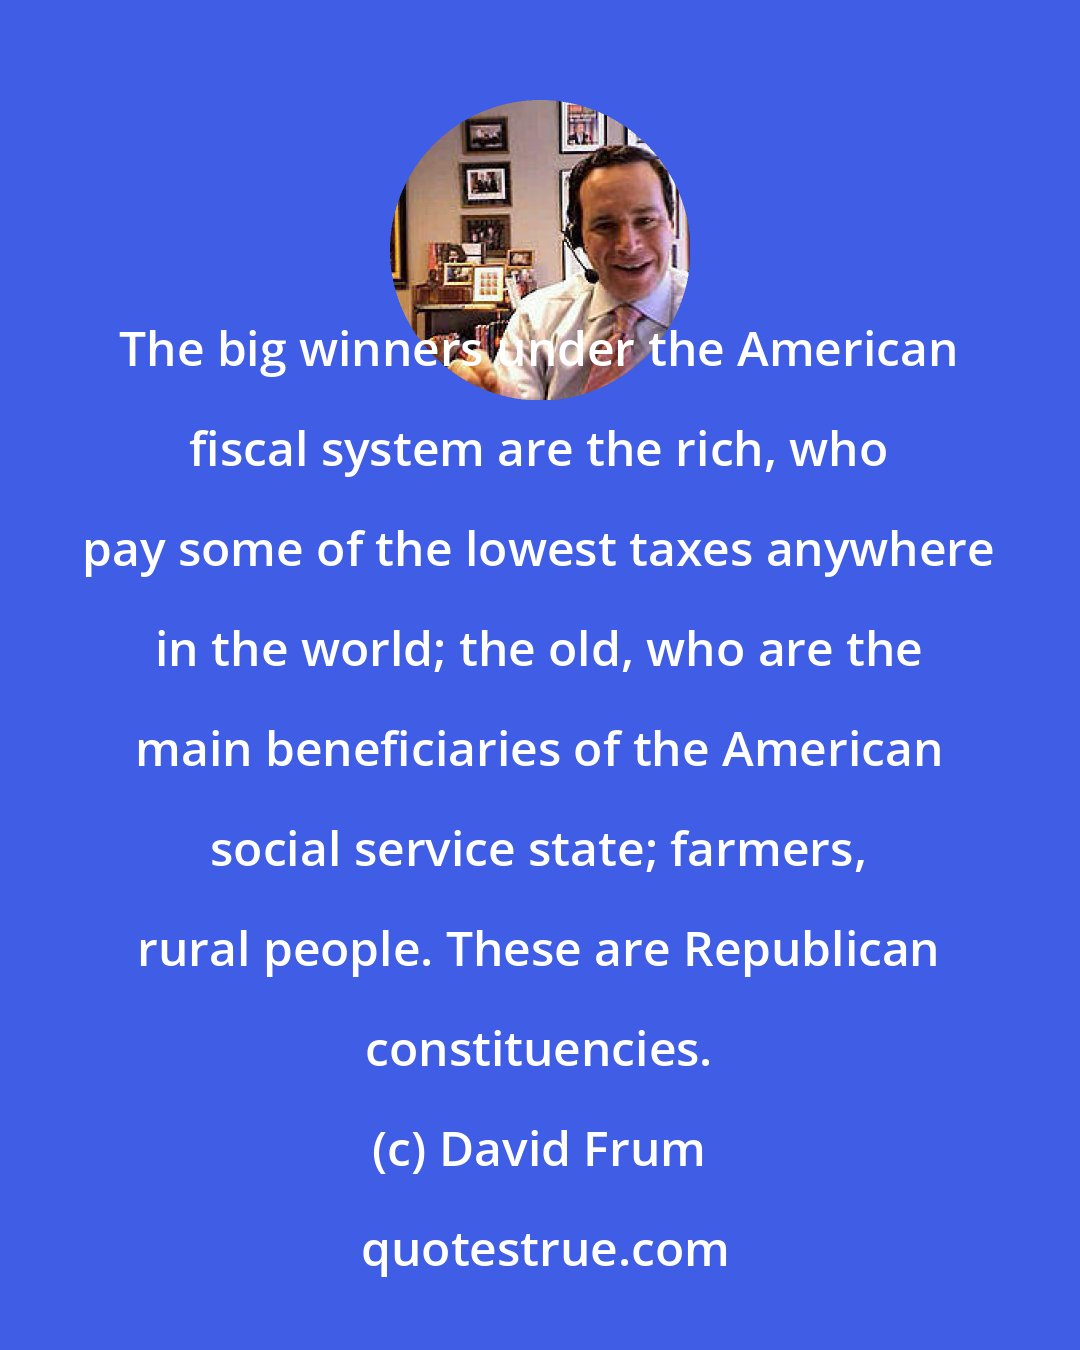 David Frum: The big winners under the American fiscal system are the rich, who pay some of the lowest taxes anywhere in the world; the old, who are the main beneficiaries of the American social service state; farmers, rural people. These are Republican constituencies.